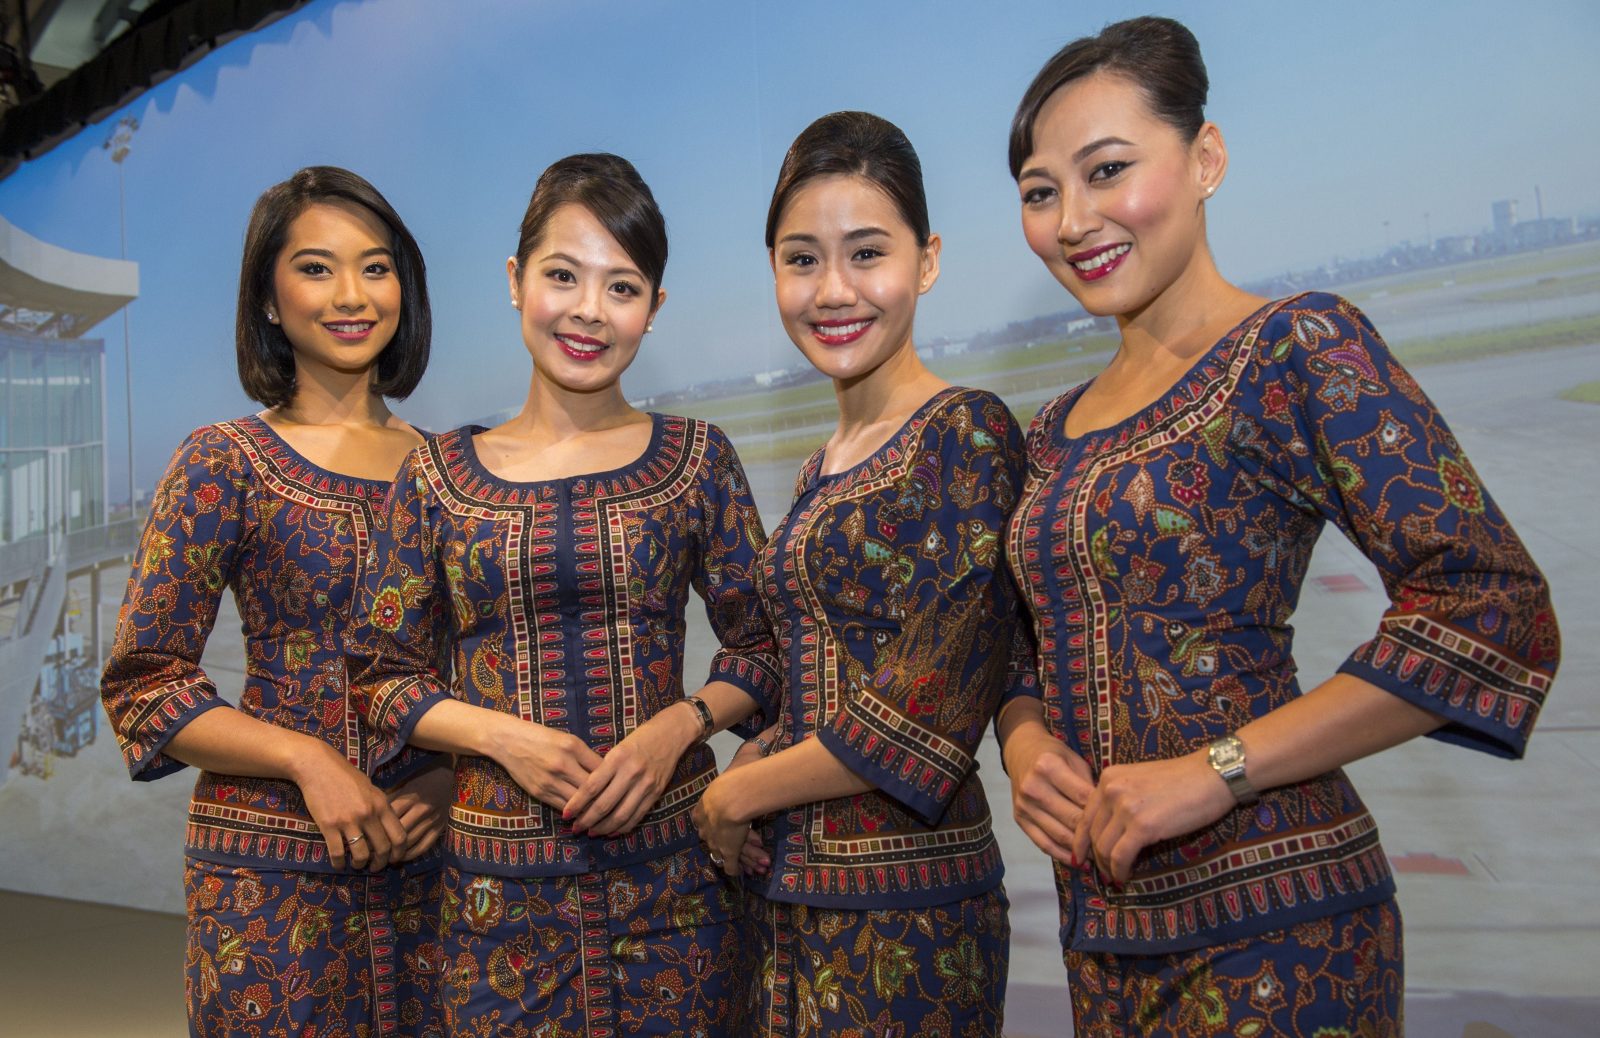 Singapore Airlines Will Keep the "Iconic Singapore Girl" in Adverts and Marketing